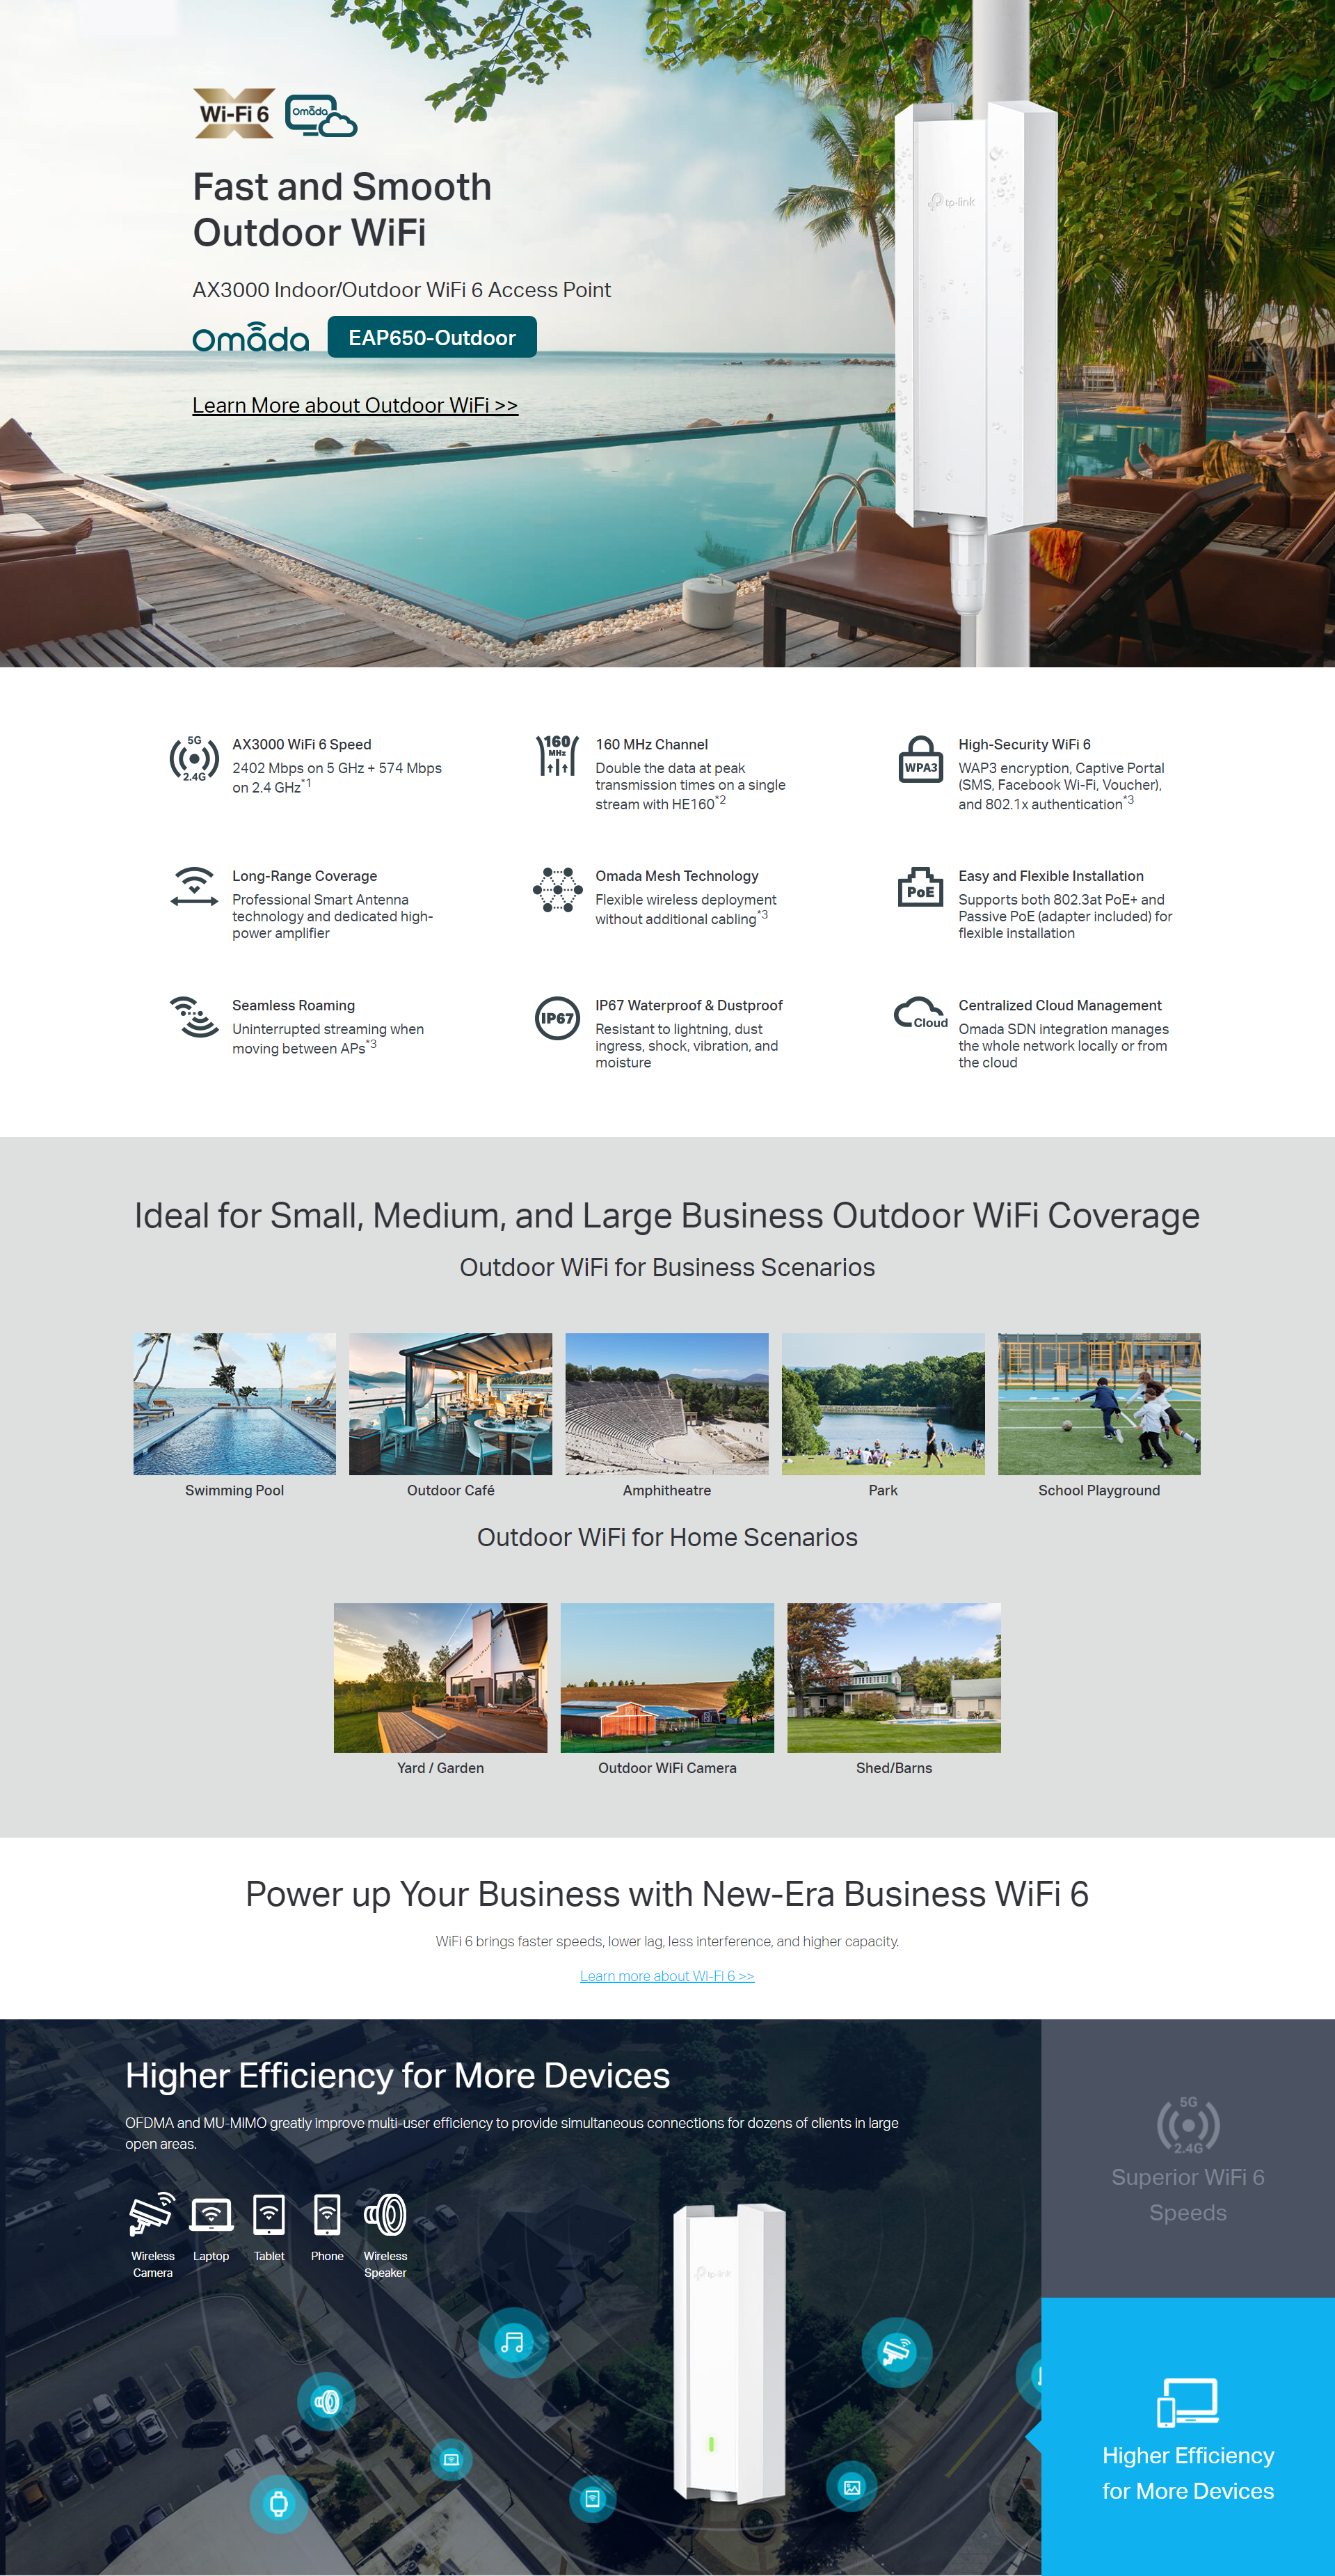 A large marketing image providing additional information about the product TP-Link EAP650-Outdoor - AX3000 Dual-Band Wi-Fi 6 Access Point - Additional alt info not provided